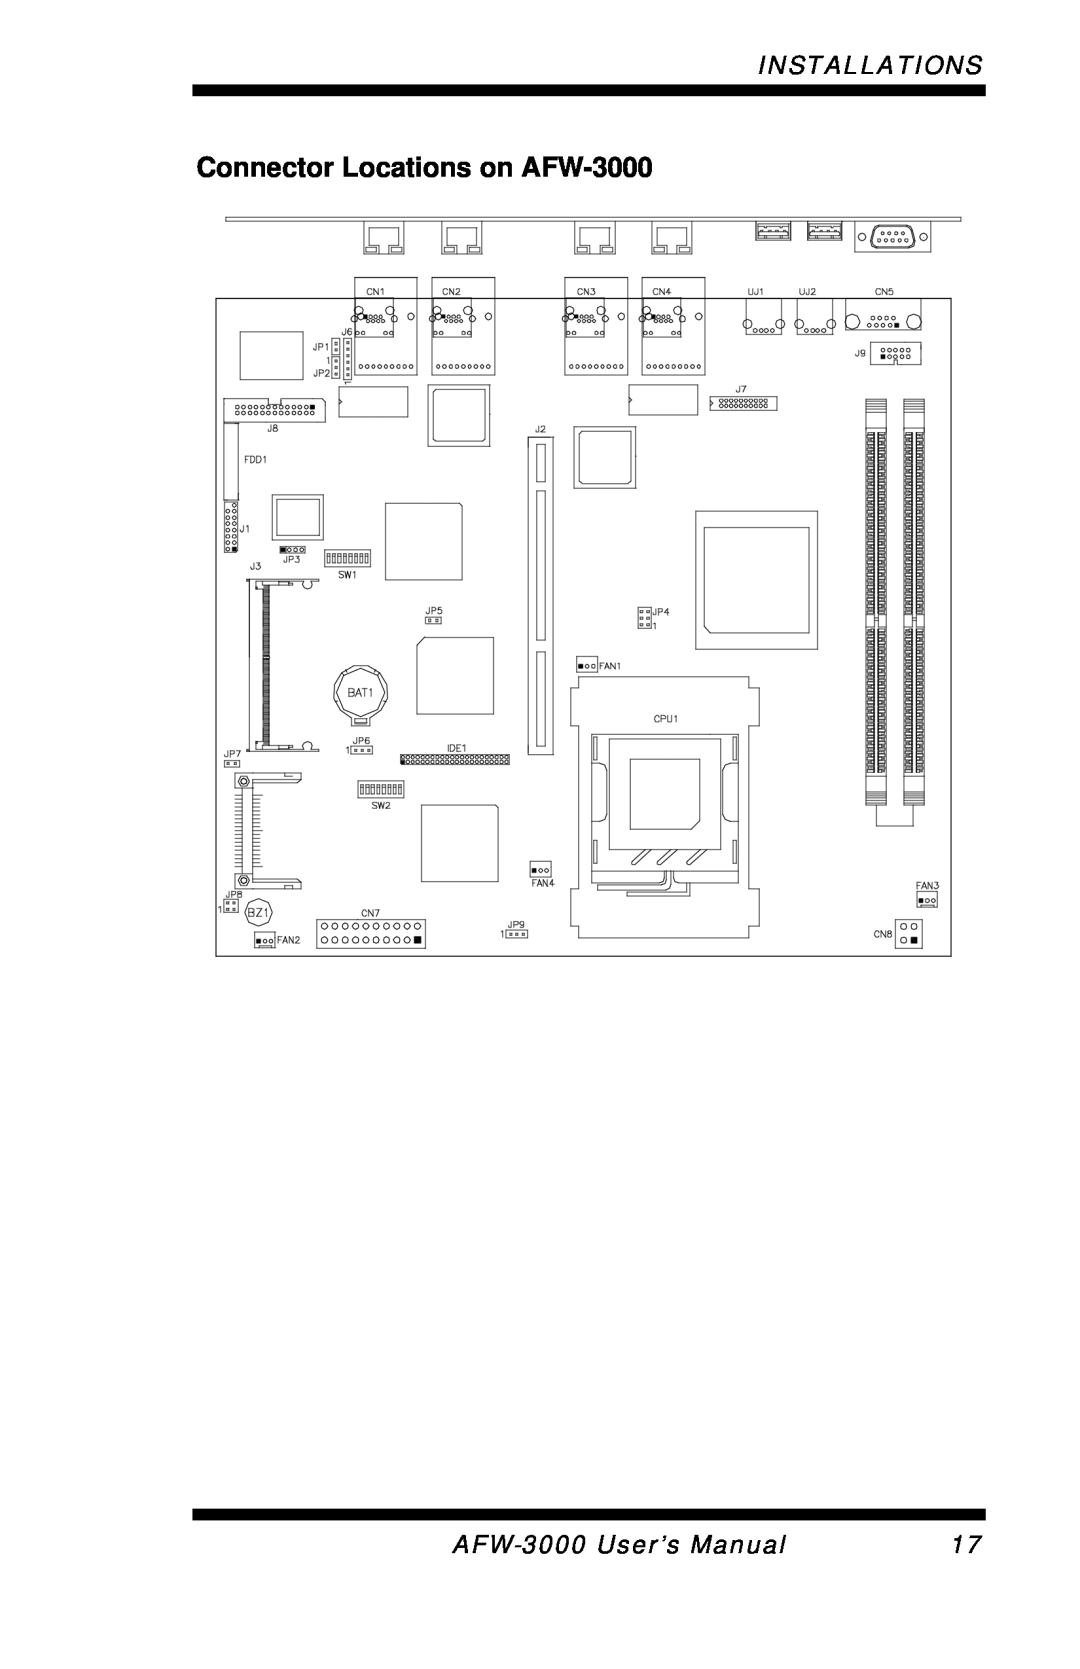 Intel E7501 user manual Connector Locations on AFW-3000, Installations, AFW-3000User’s Manual 